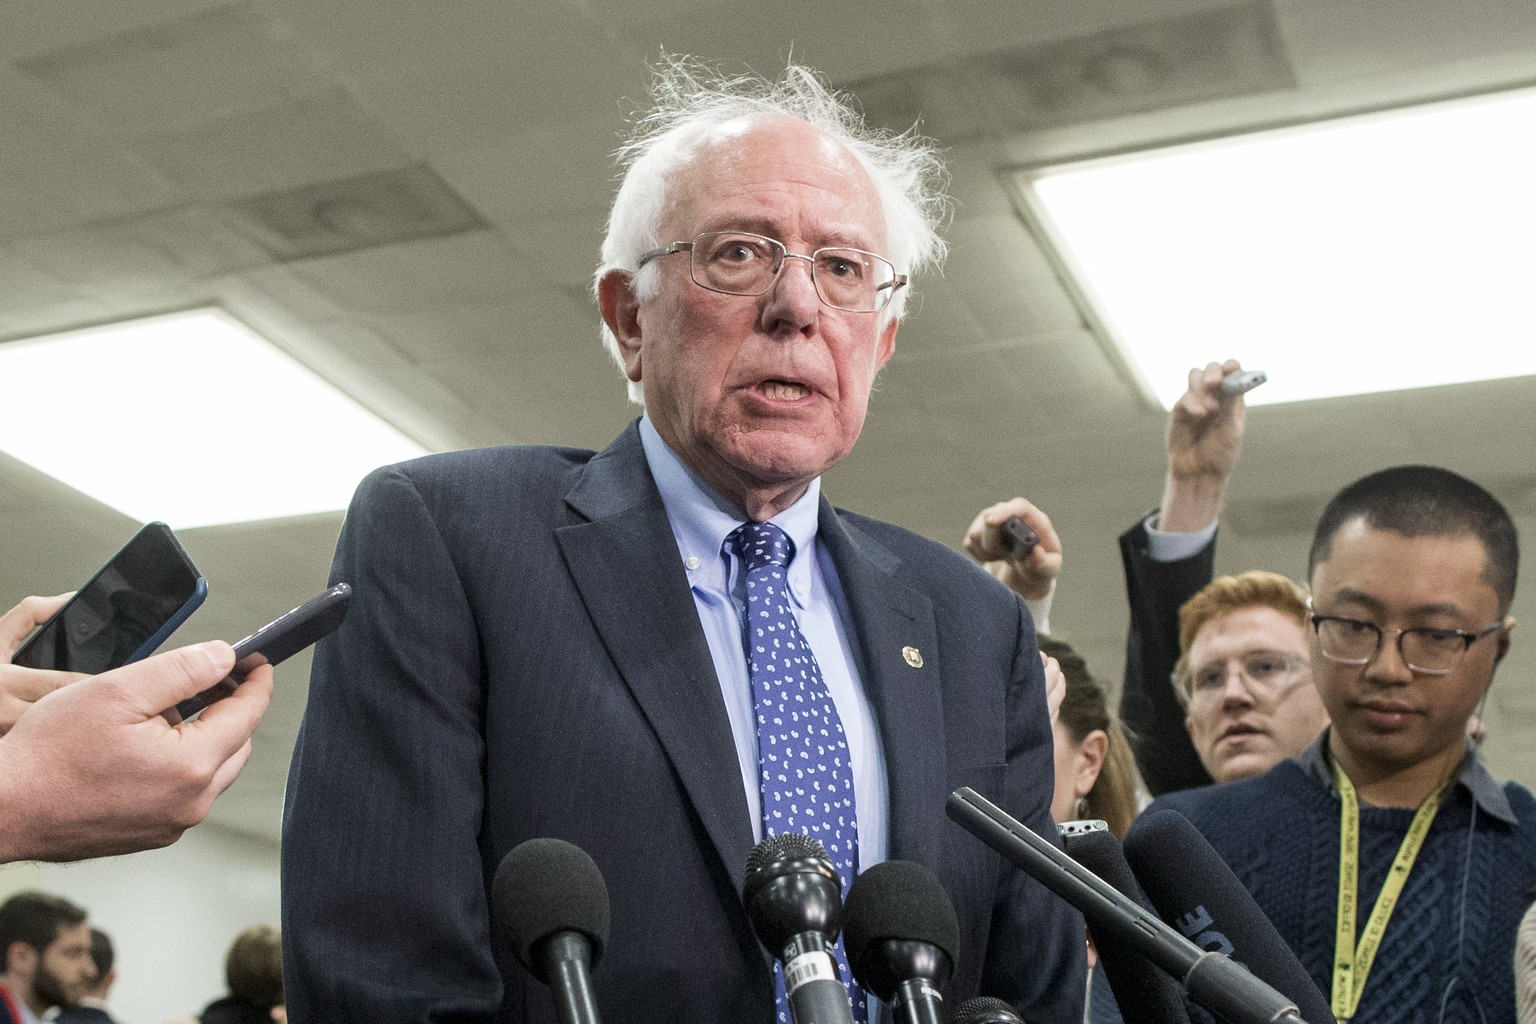 epa07195588 Independent Senator from Vermont Bernie Sanders (C) speaks to members of the news media following a closed briefing for US senators on Saudi Arabia, on Capitol Hill in Washington, DC, USA, ...